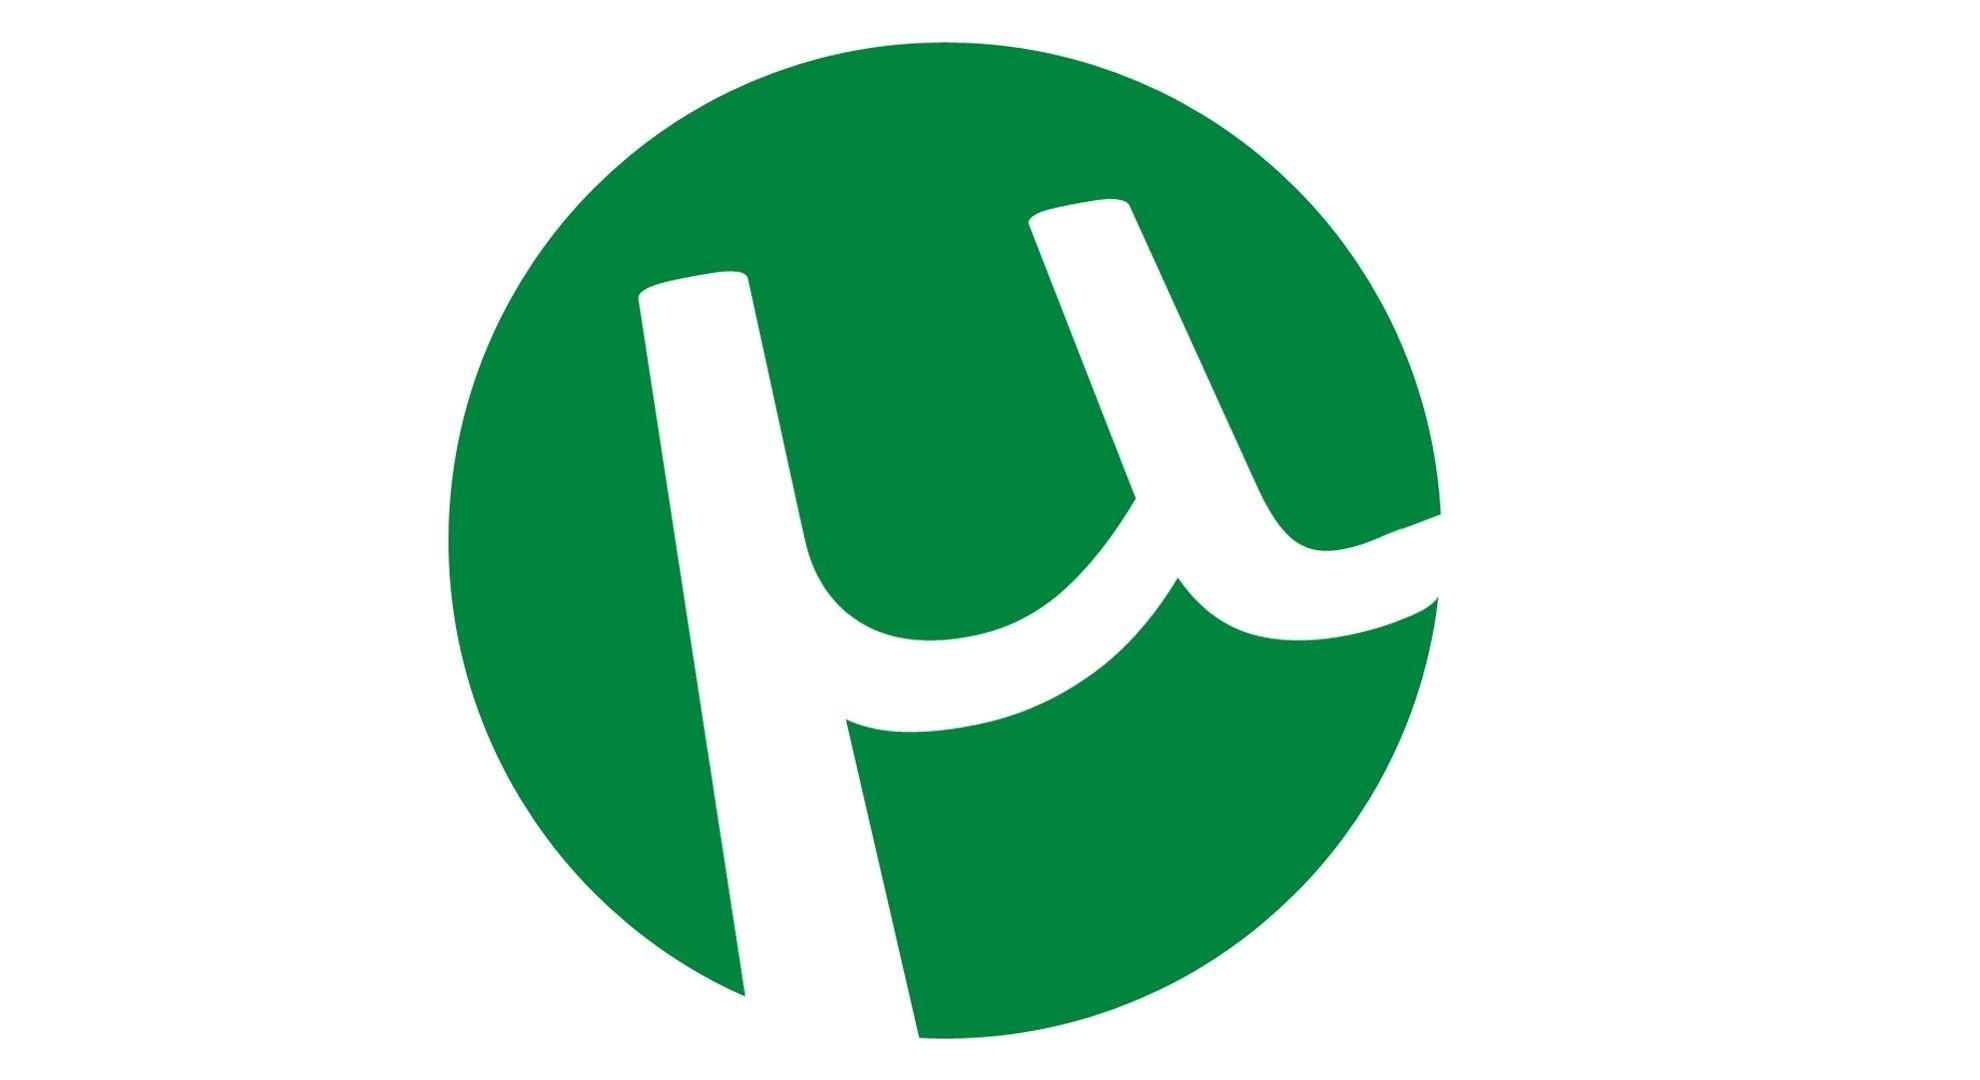 Green U Logo - Download a uTorrent Version That Chrome Doesn't Flag as Malicious